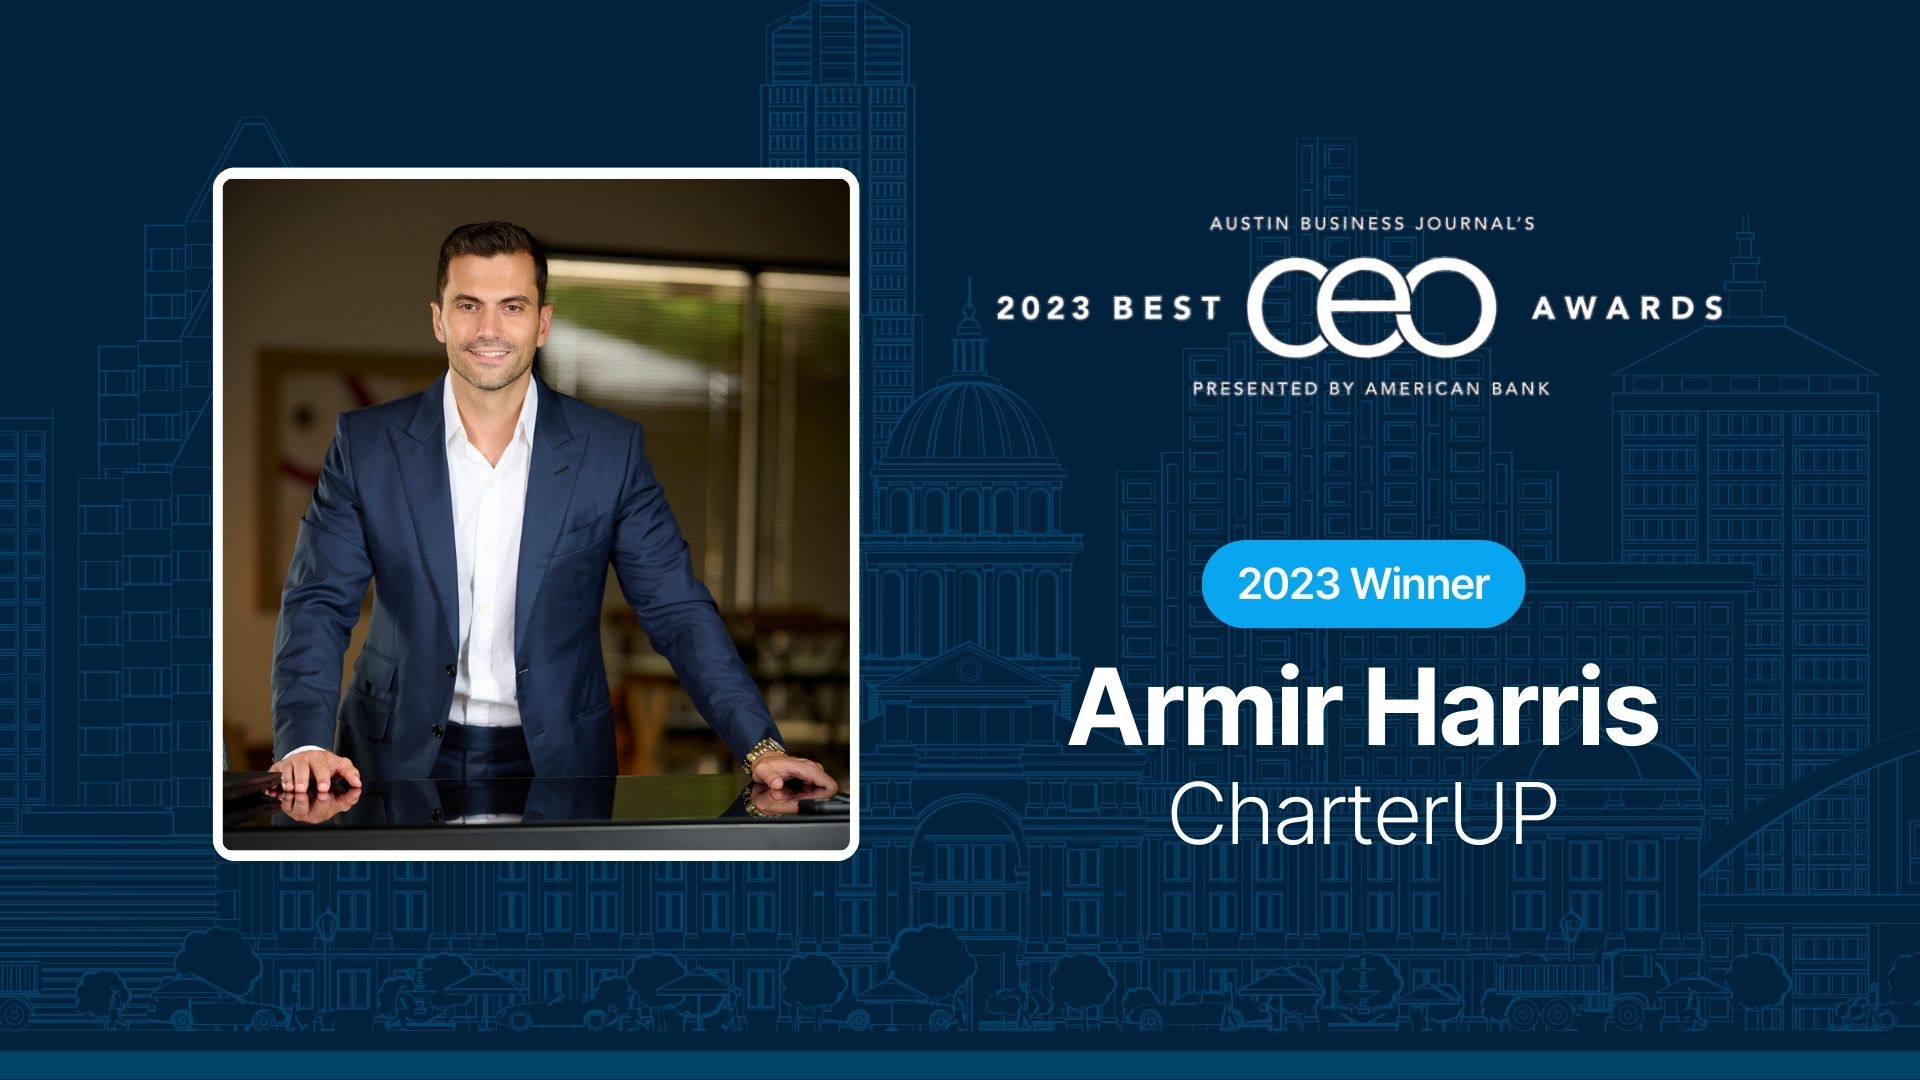 Armir Harris was recognized as one of Austin's Best CEOs by the Austin Business Journal.